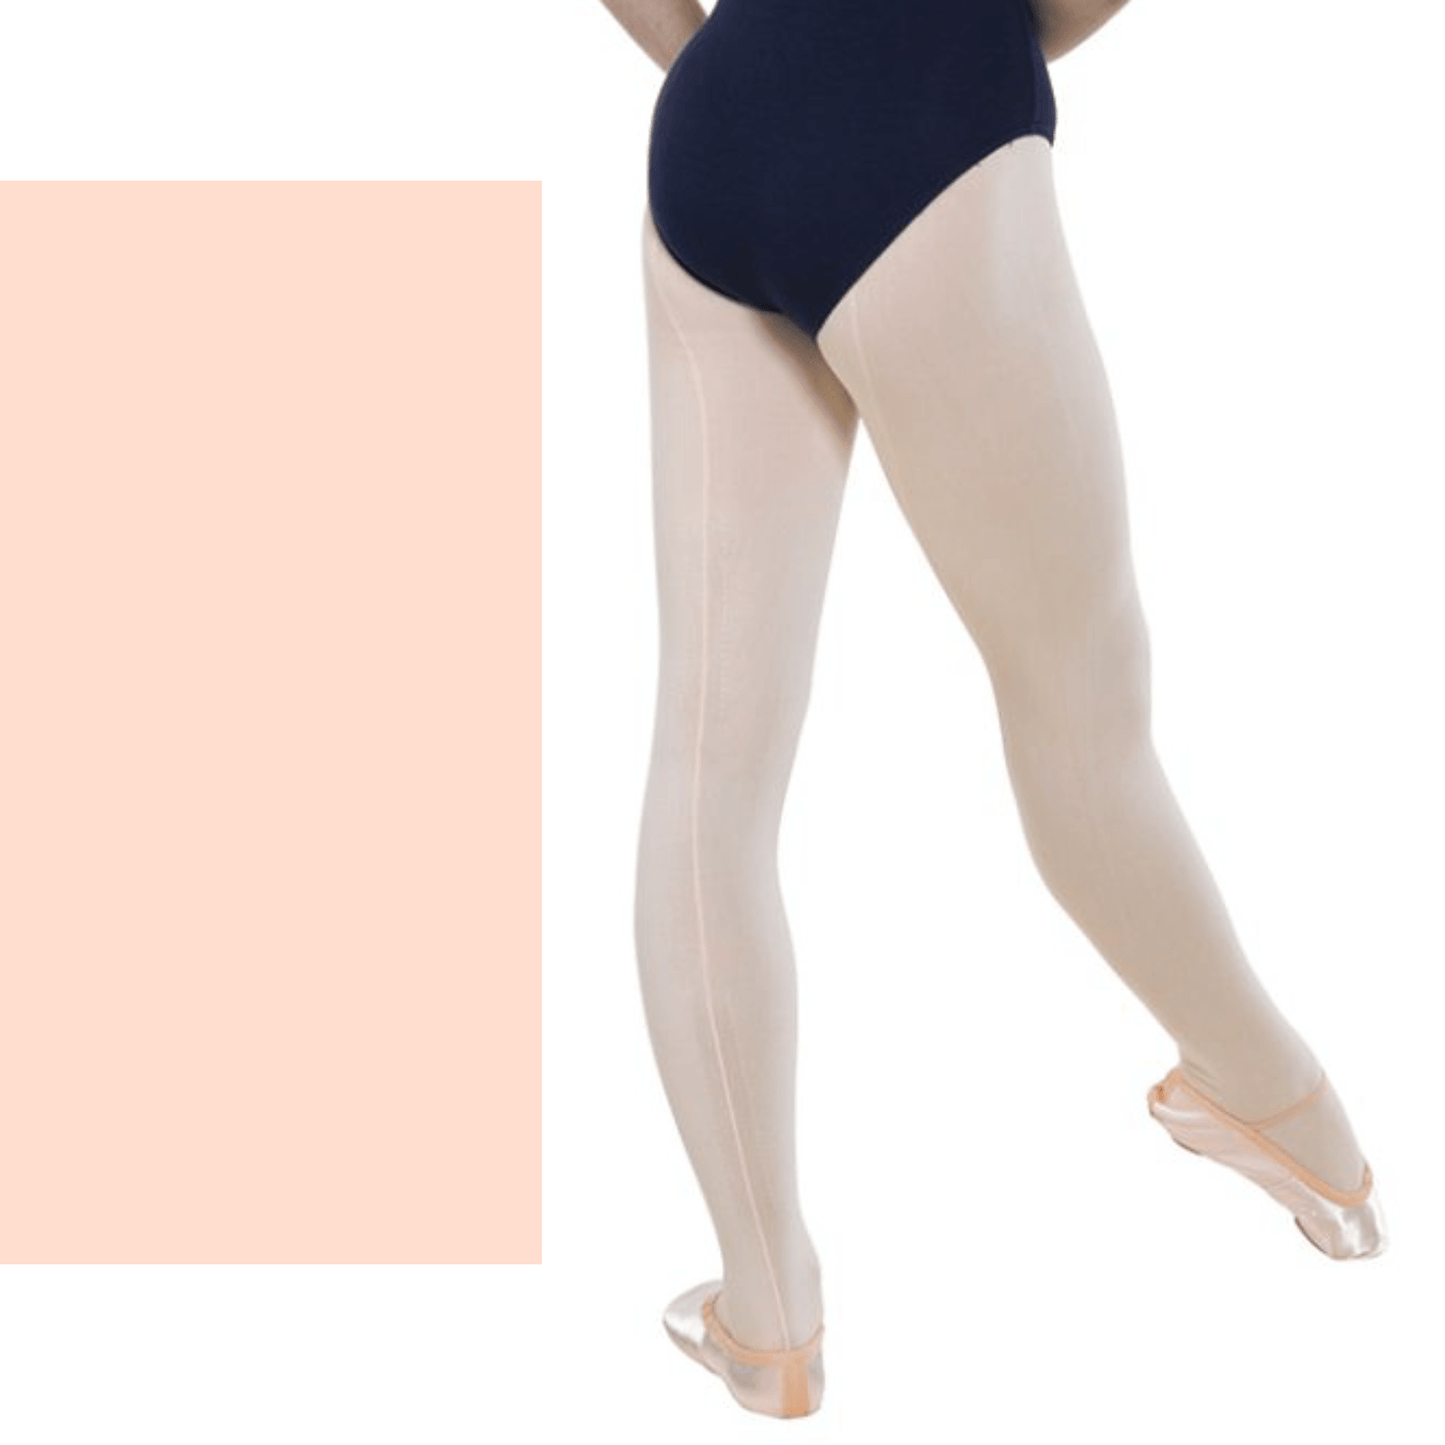 DEBUT SEAMED BALLET TIGHTS Tights & Socks Debut Pink XX Tall/XX Large Adult 